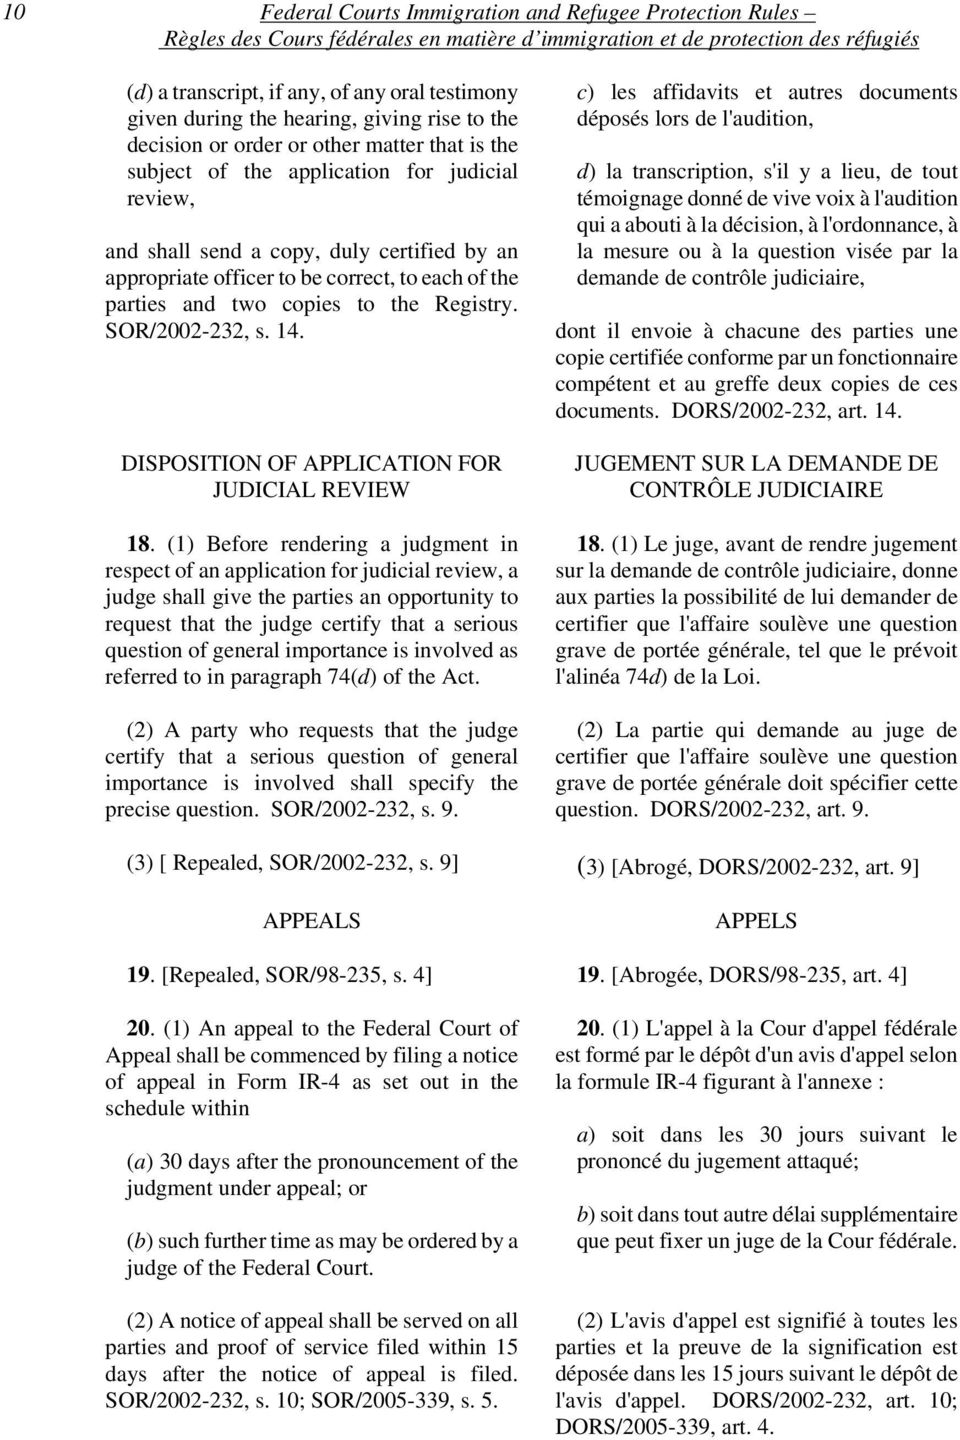 14. DISPOSITION OF APPLICATION FOR JUDICIAL REVIEW 18.